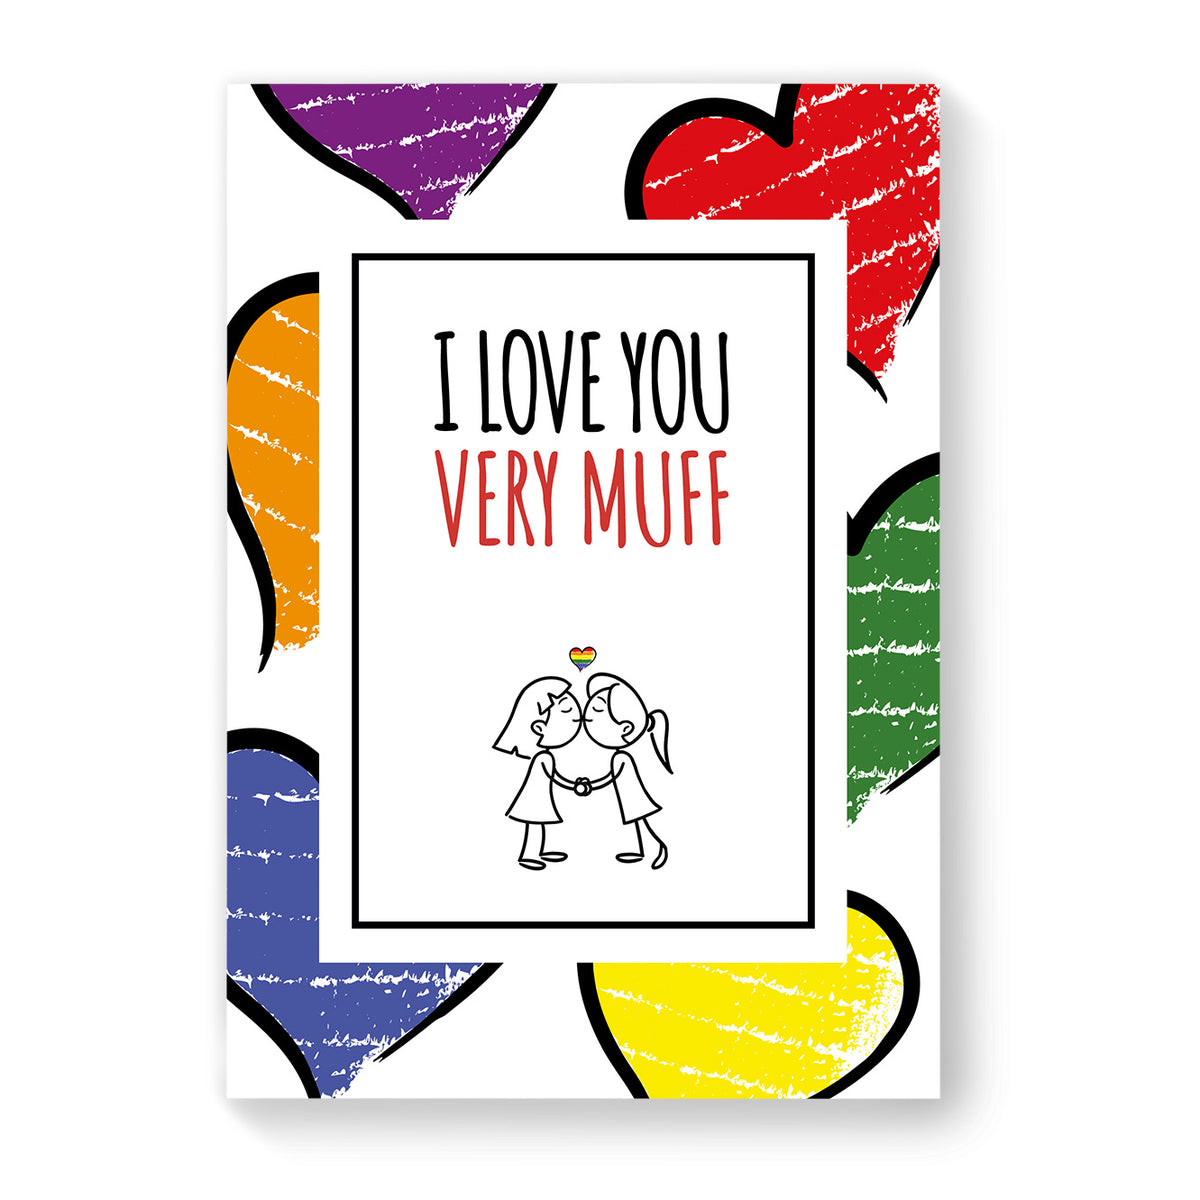 I love you very muff - Lesbian Gay Couple Card - Large Heart | Gift